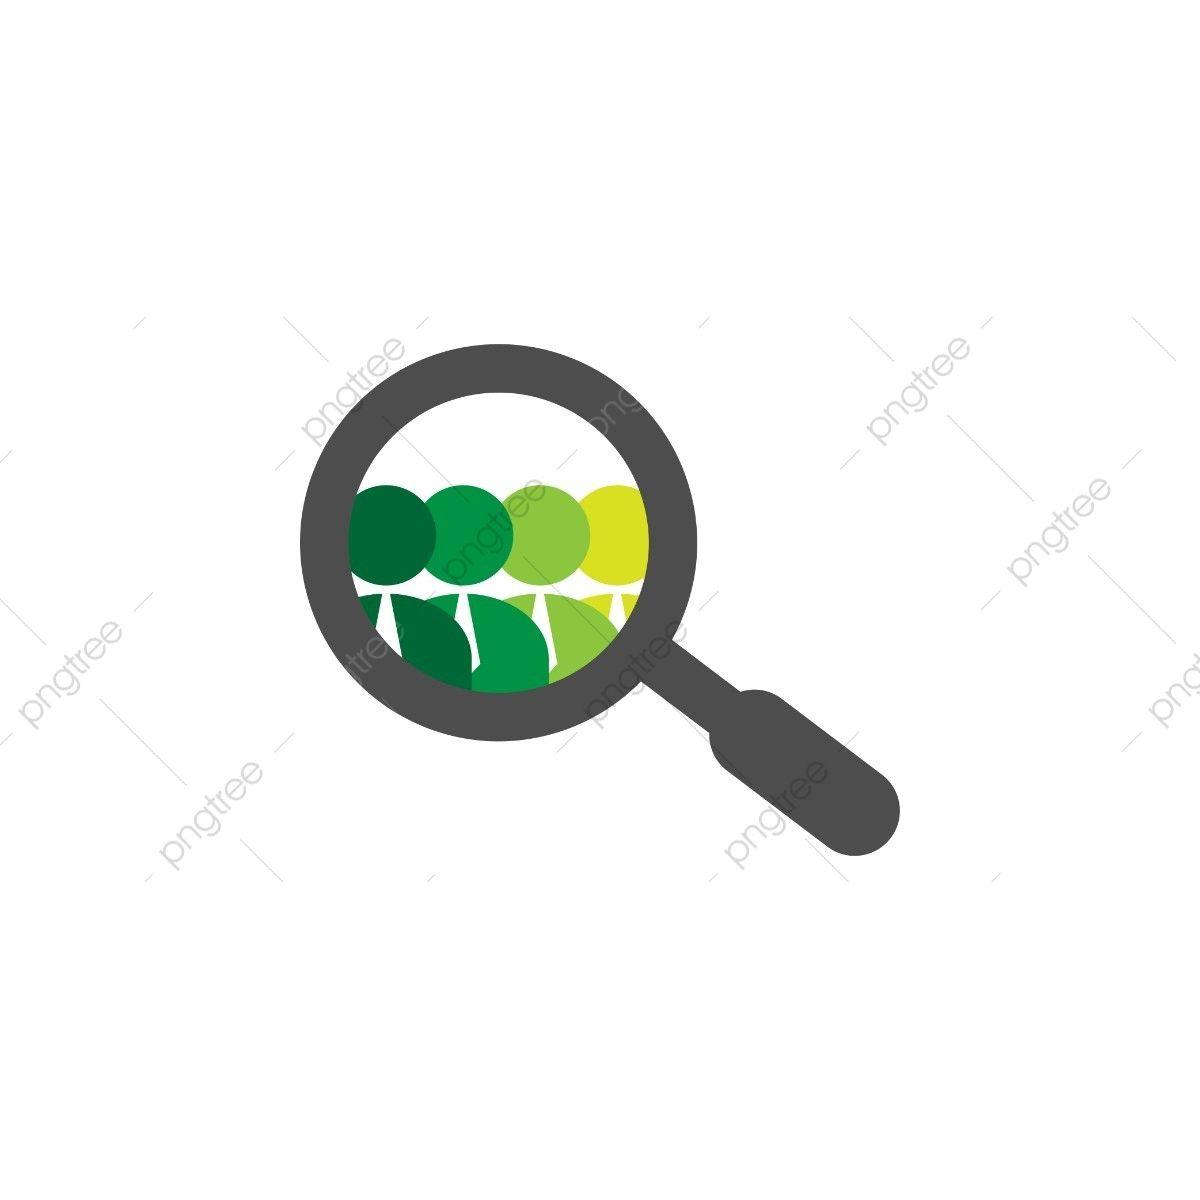 Seeker Logo - Job Seeker Logo Icon Template, Hire, Look, Corporate PNG and Vector